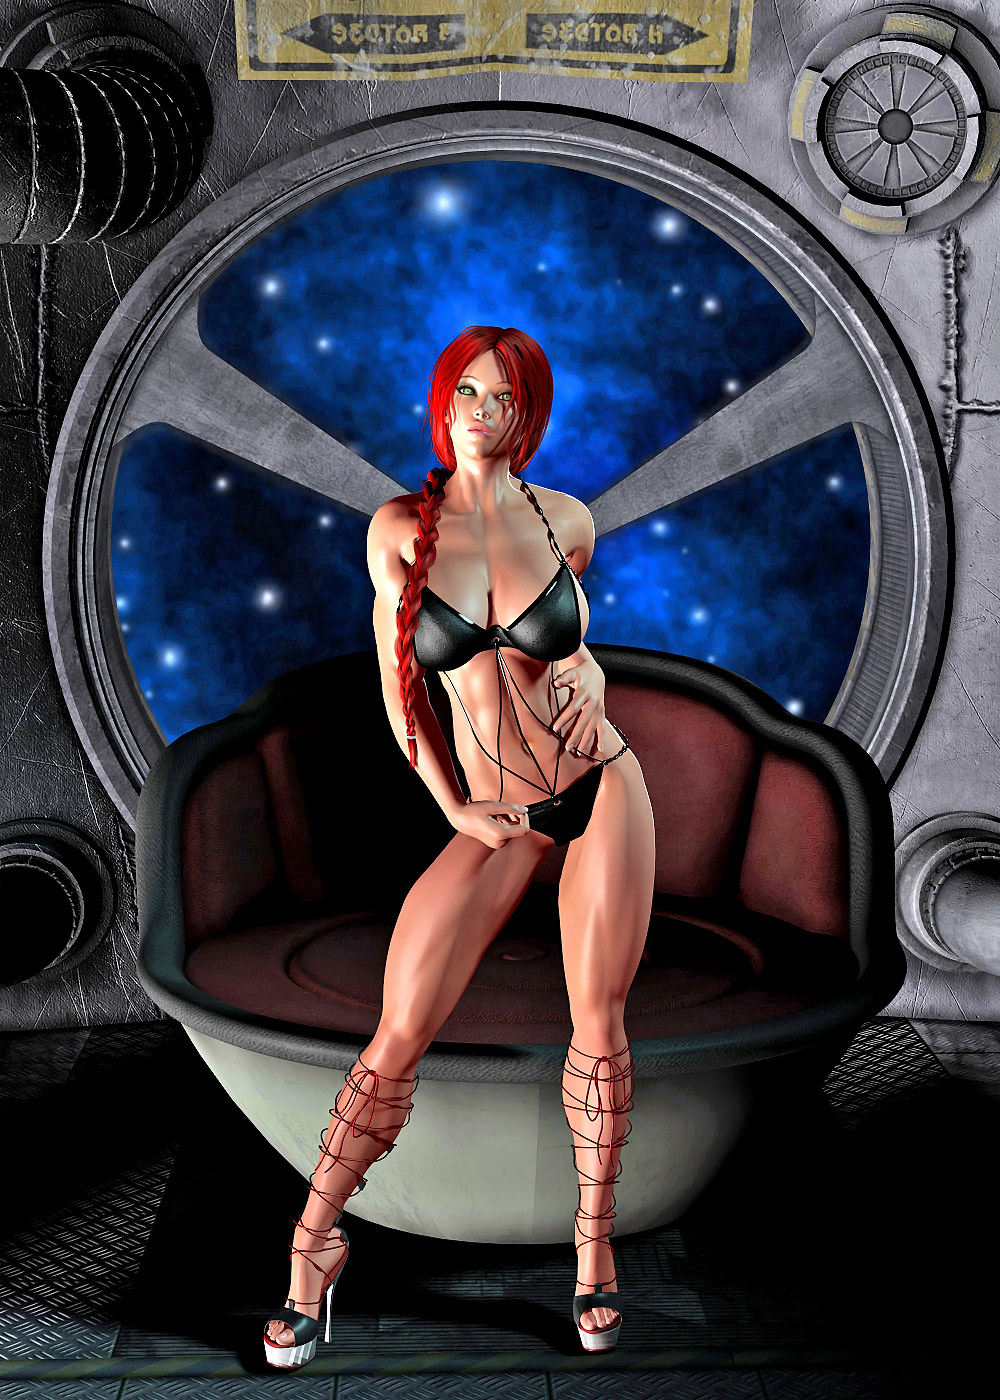 Shemale Spaceship - Alpha Centauri surprise - 3d shemales with monster boobs at  Hd3dMonsterSex.com